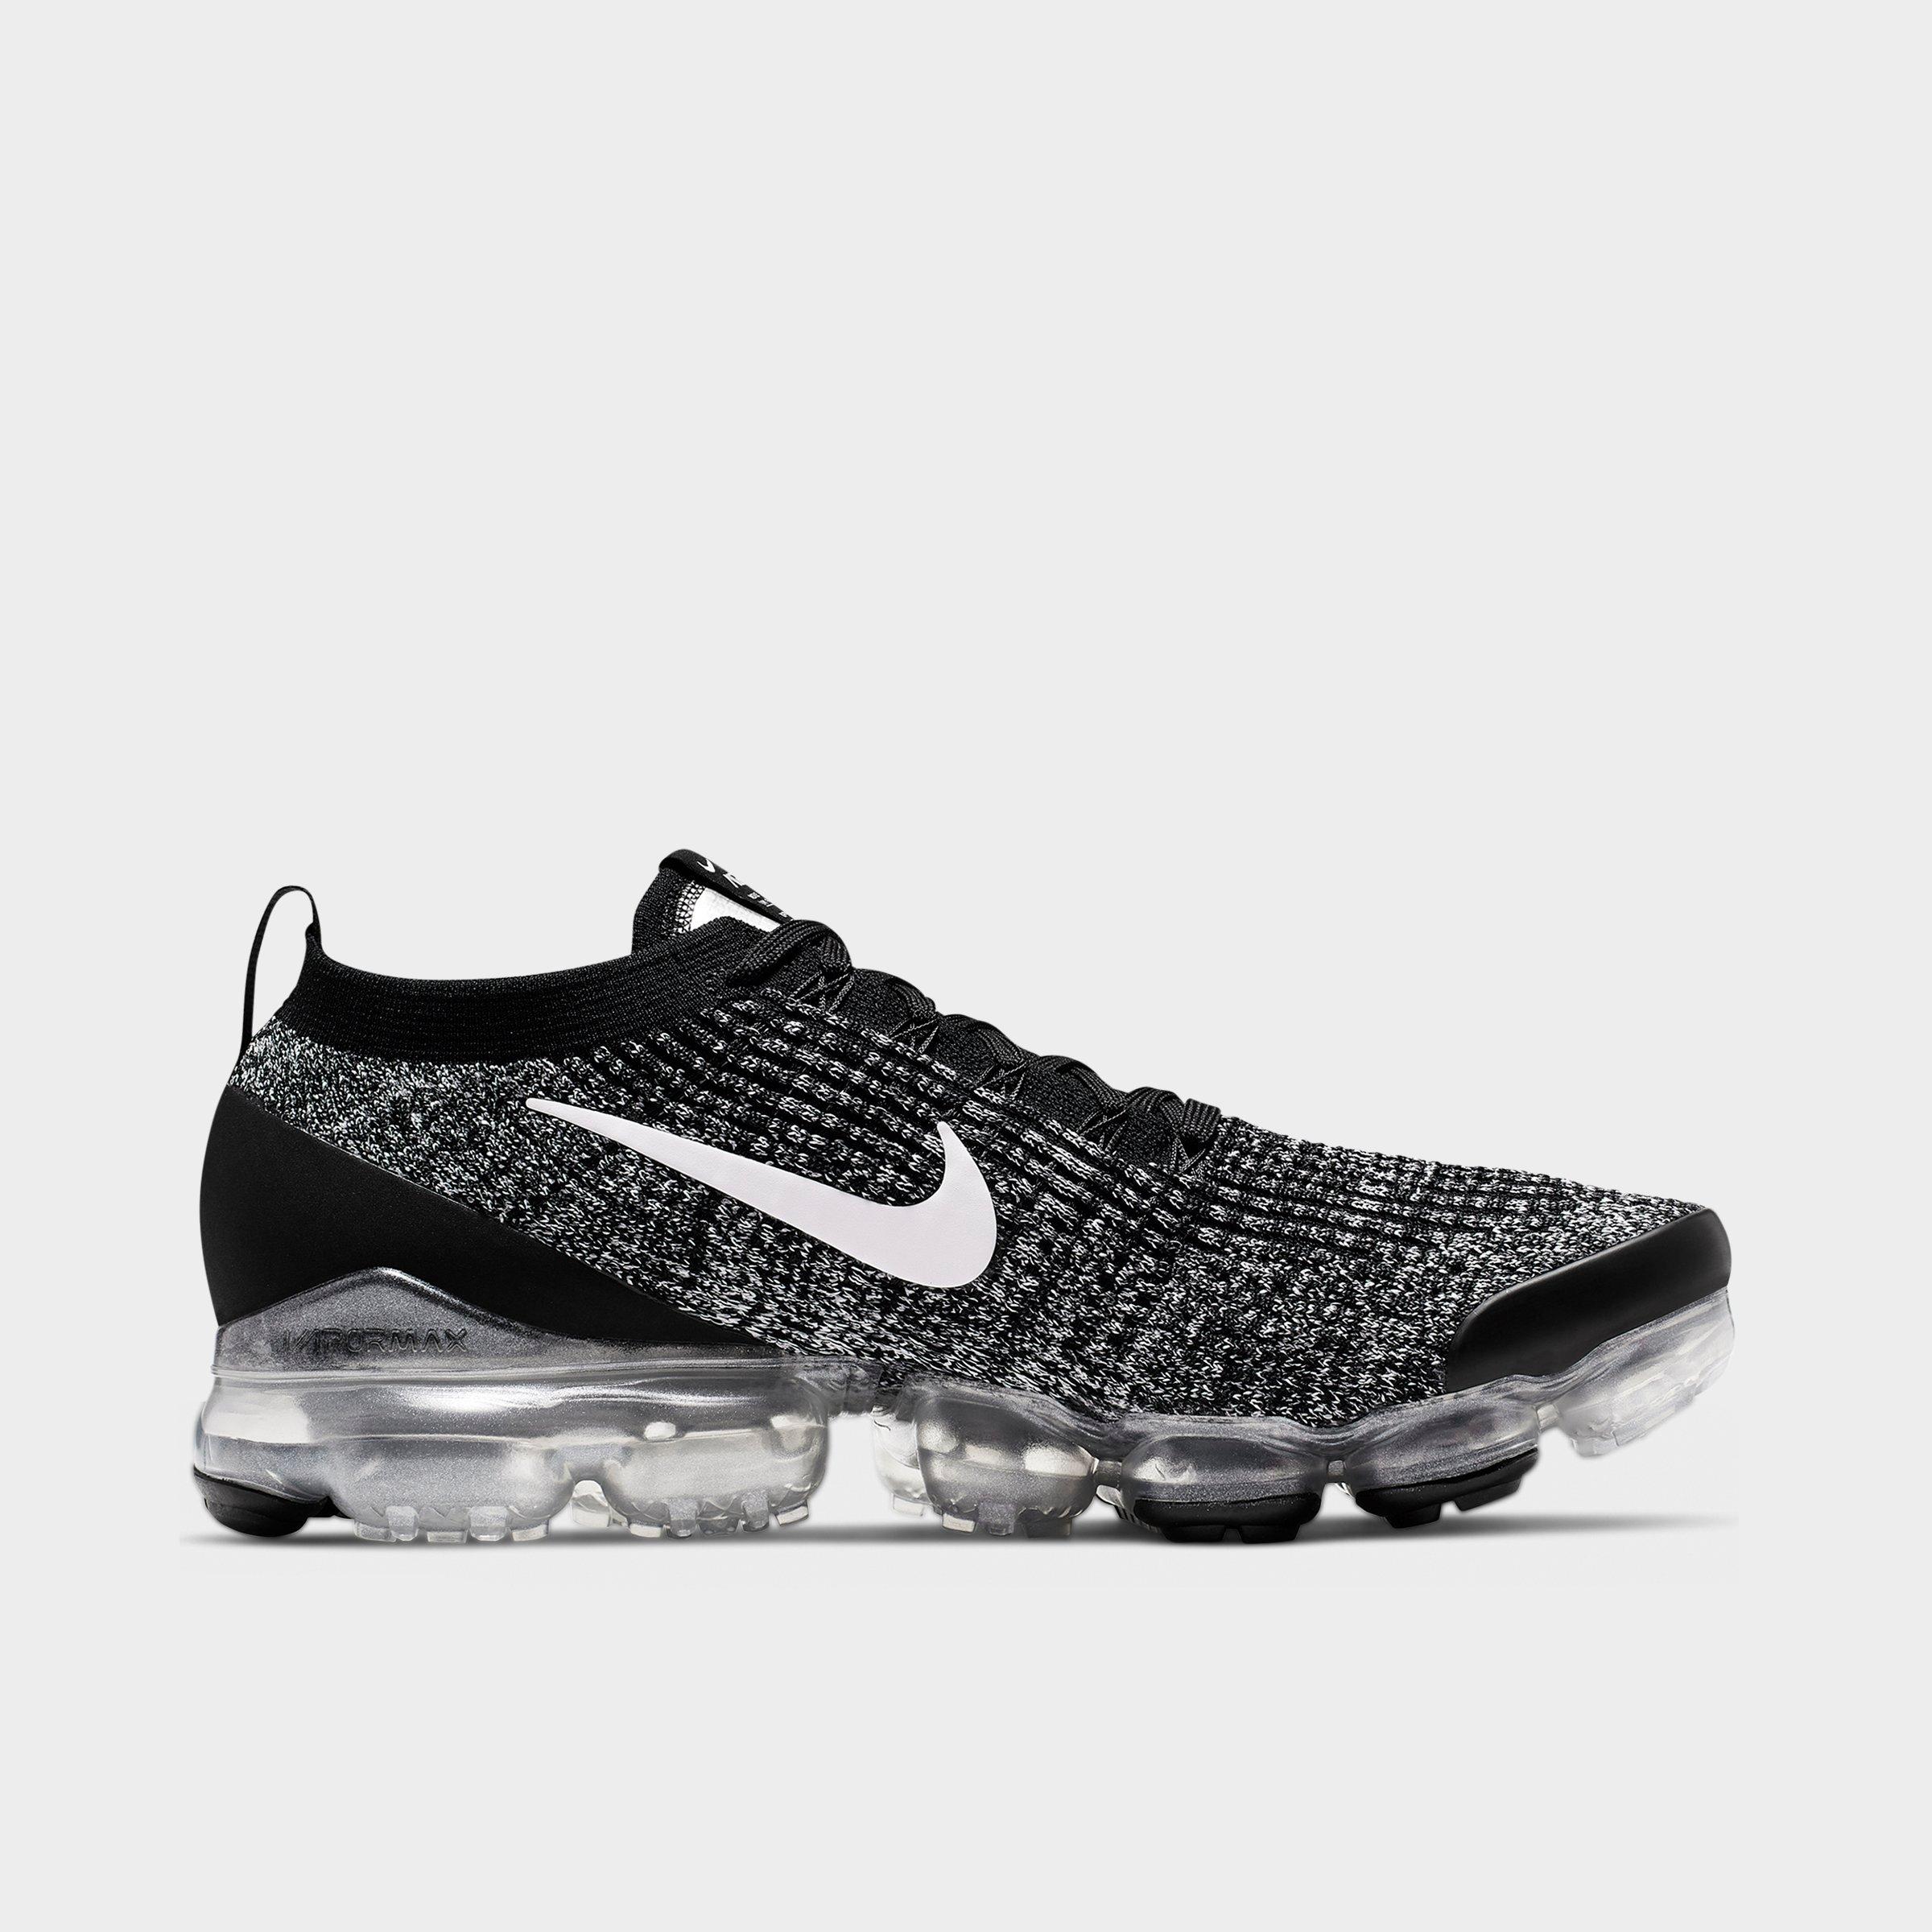 vapormax flyknit 3 white and black